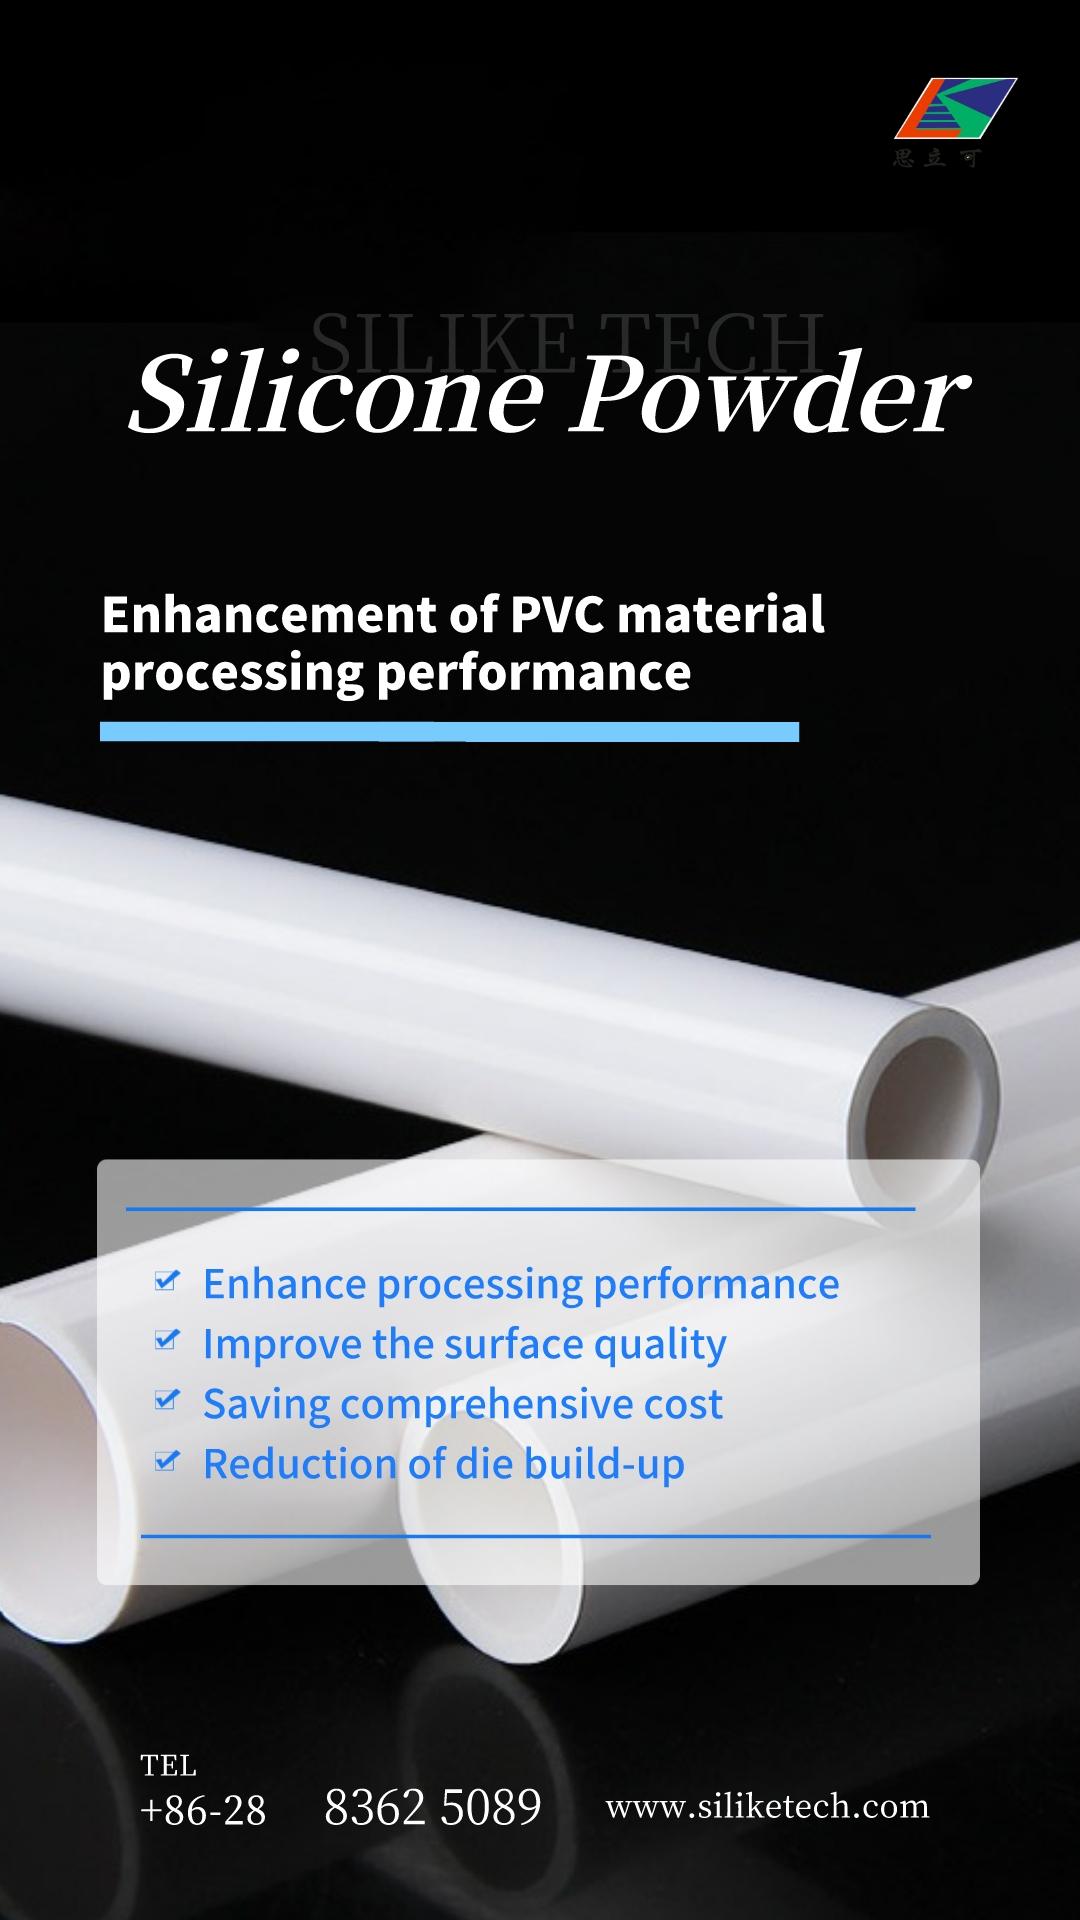 How to improve the processing performance of PVC material